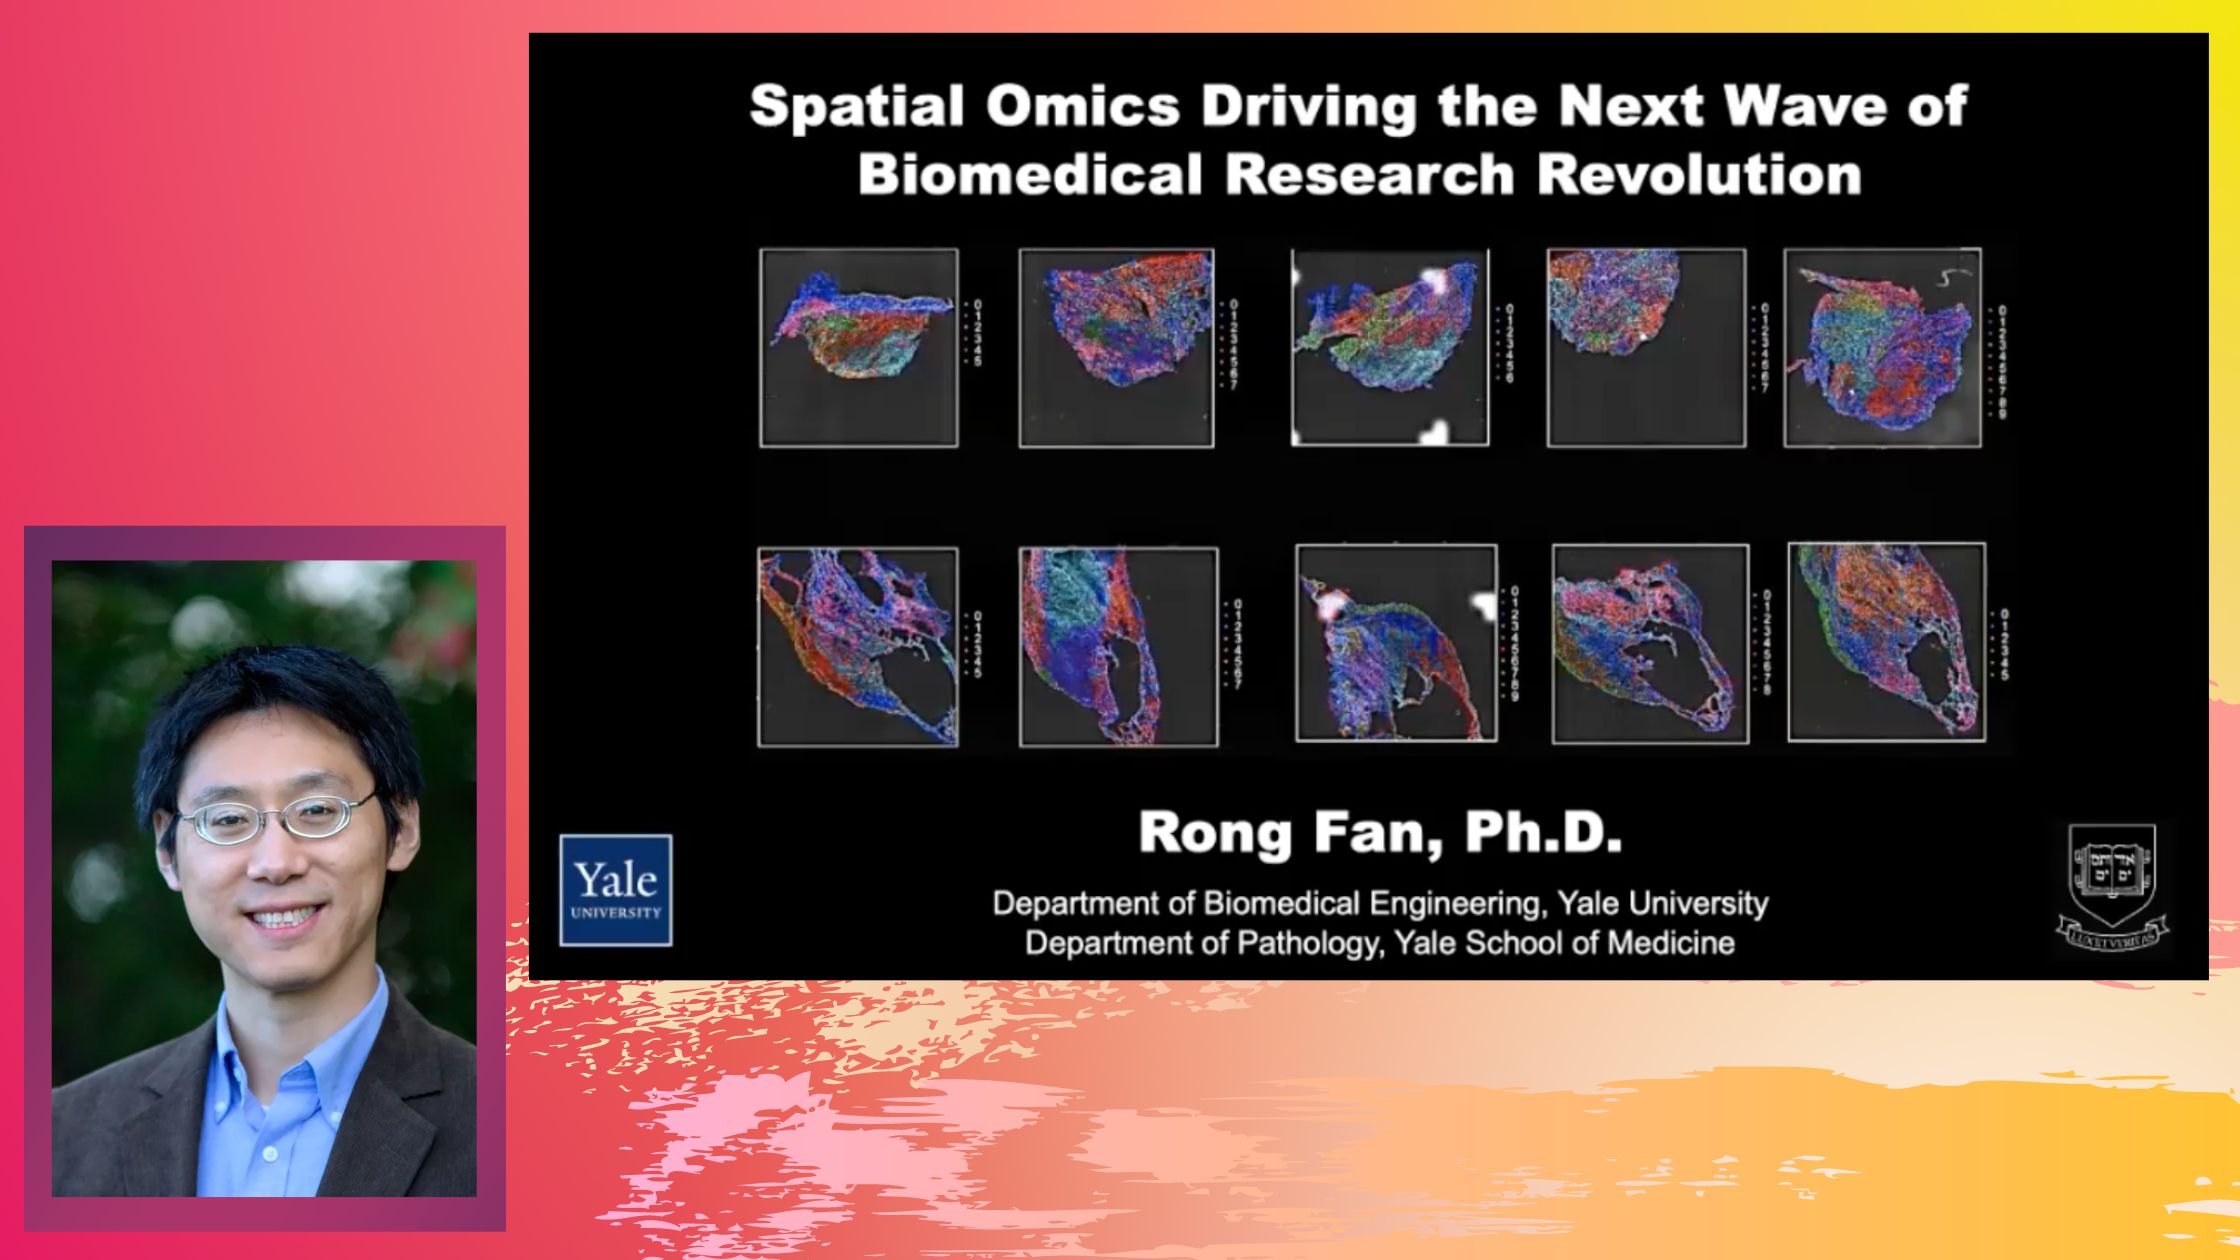 Spatial Omics Driving the Next Wave of Biomedical Research Revolution- Dr. Rong Fan